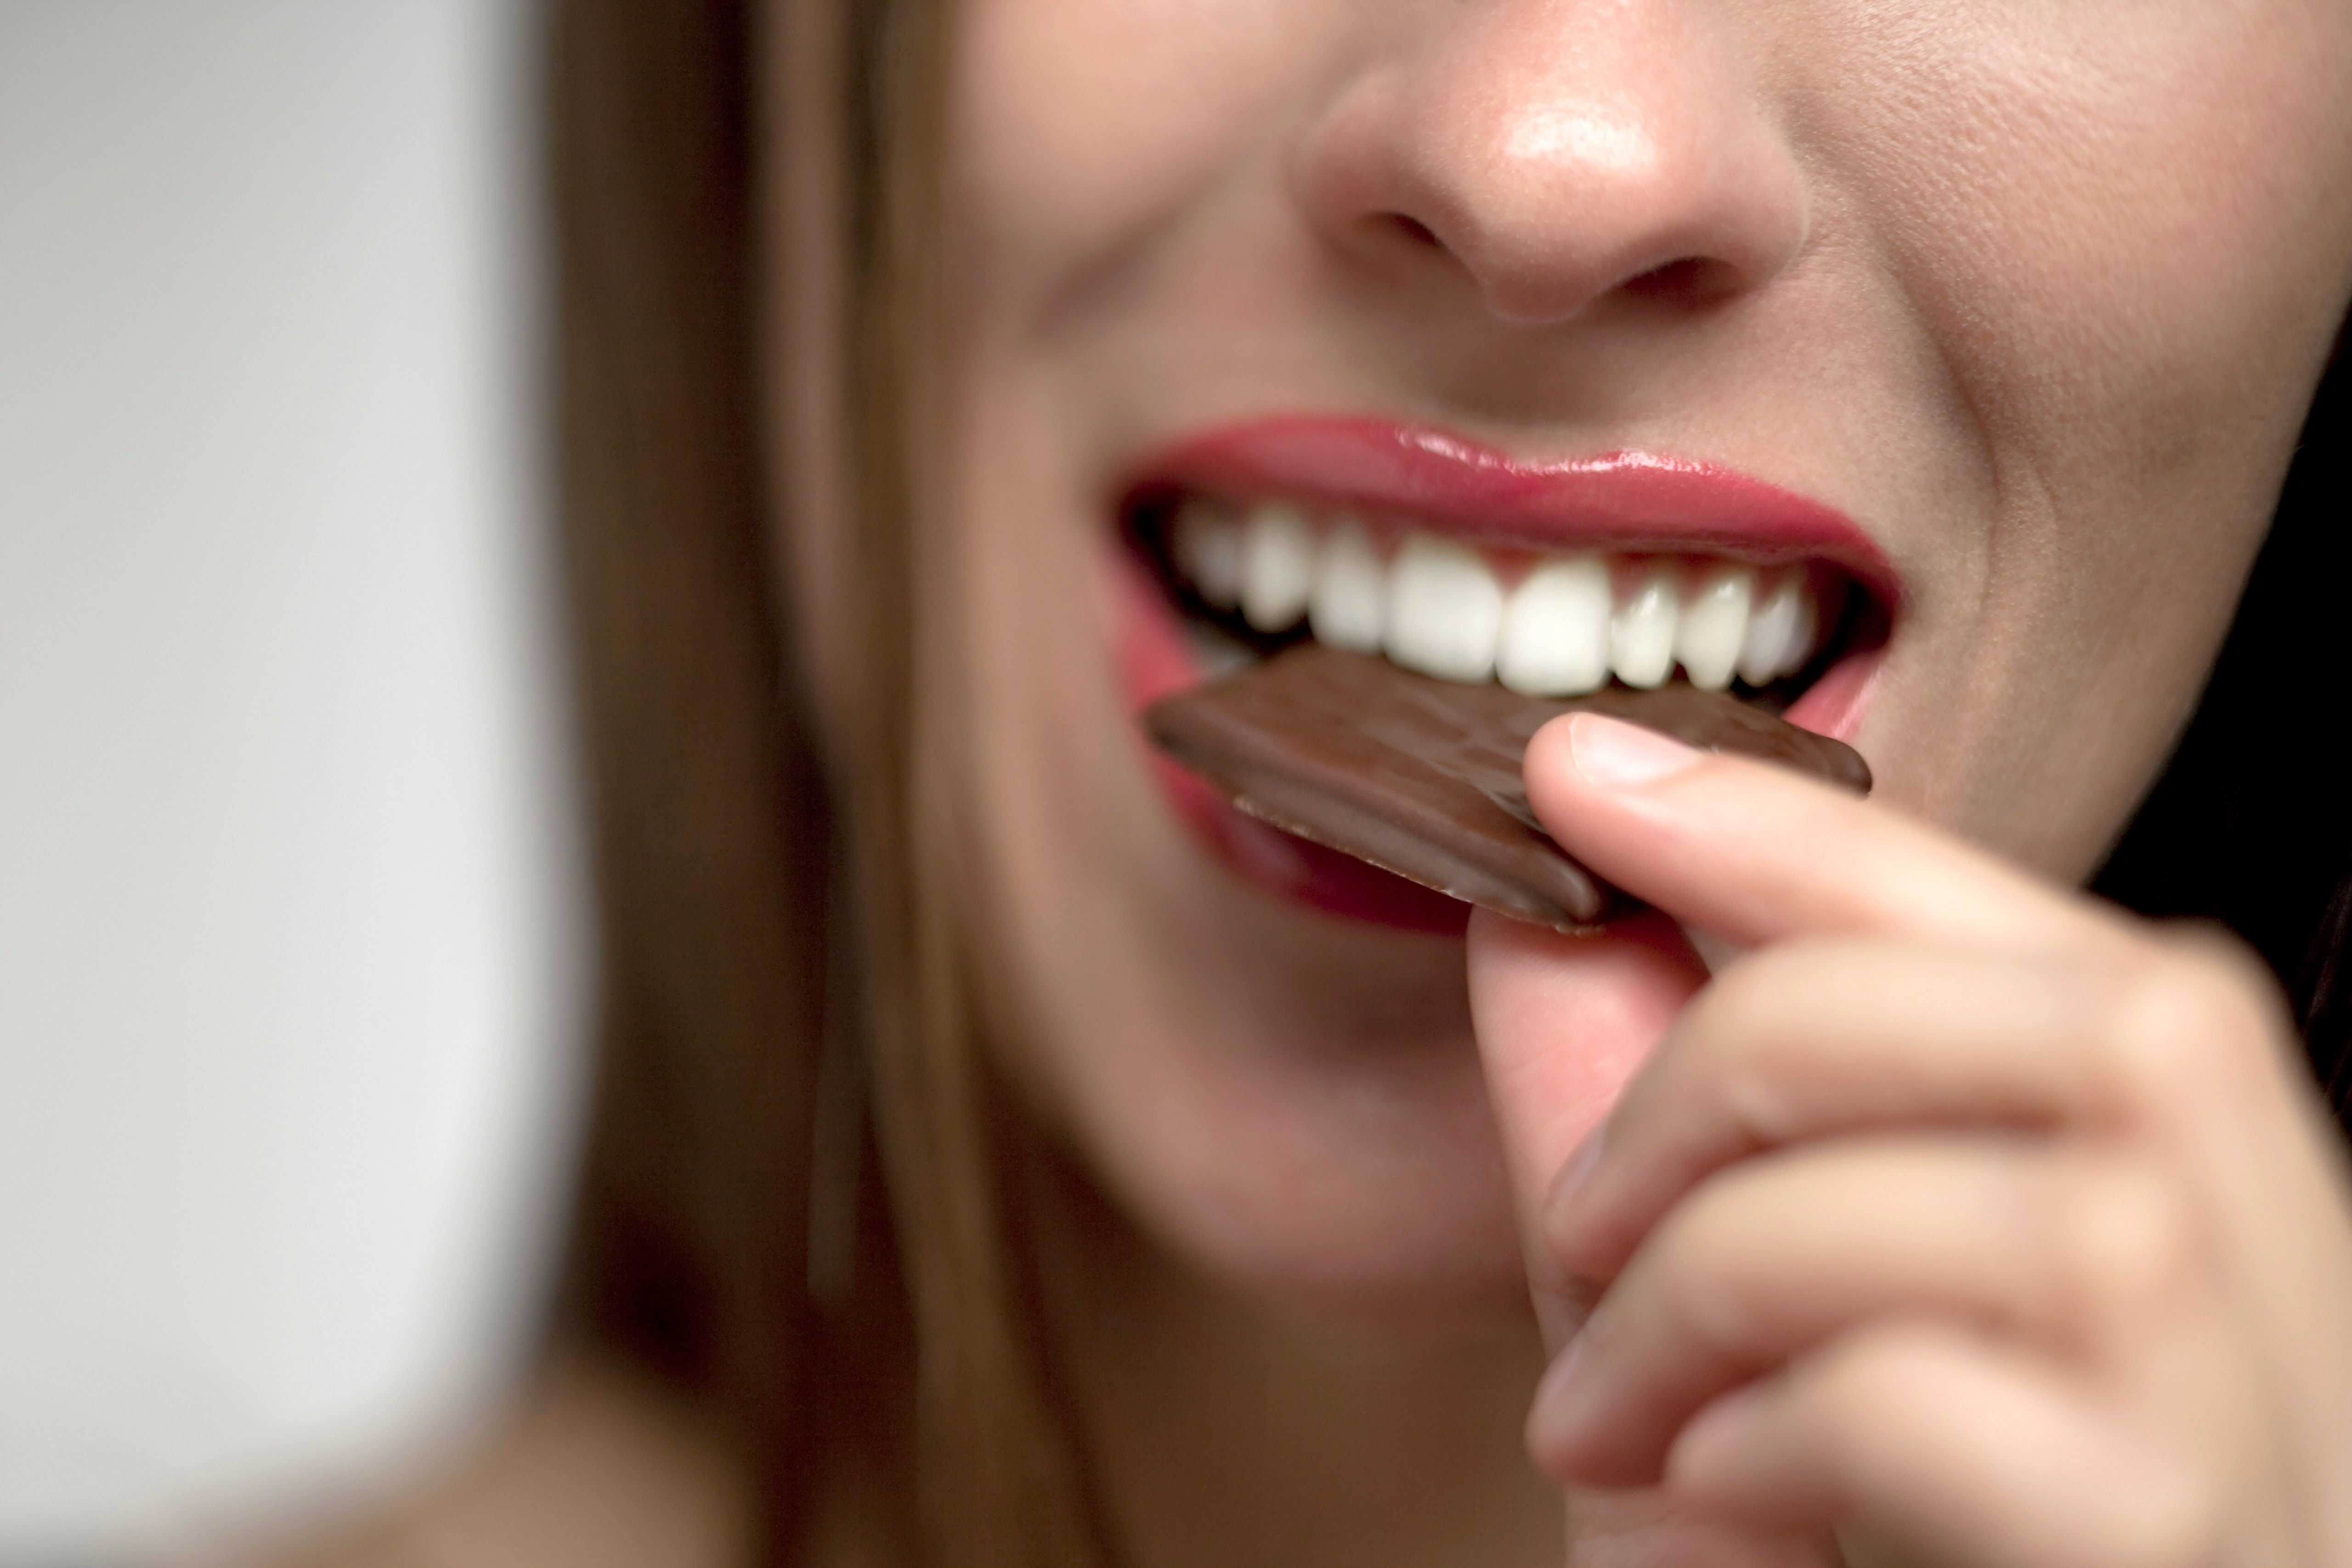 woman bites into a piece of chocolate candy